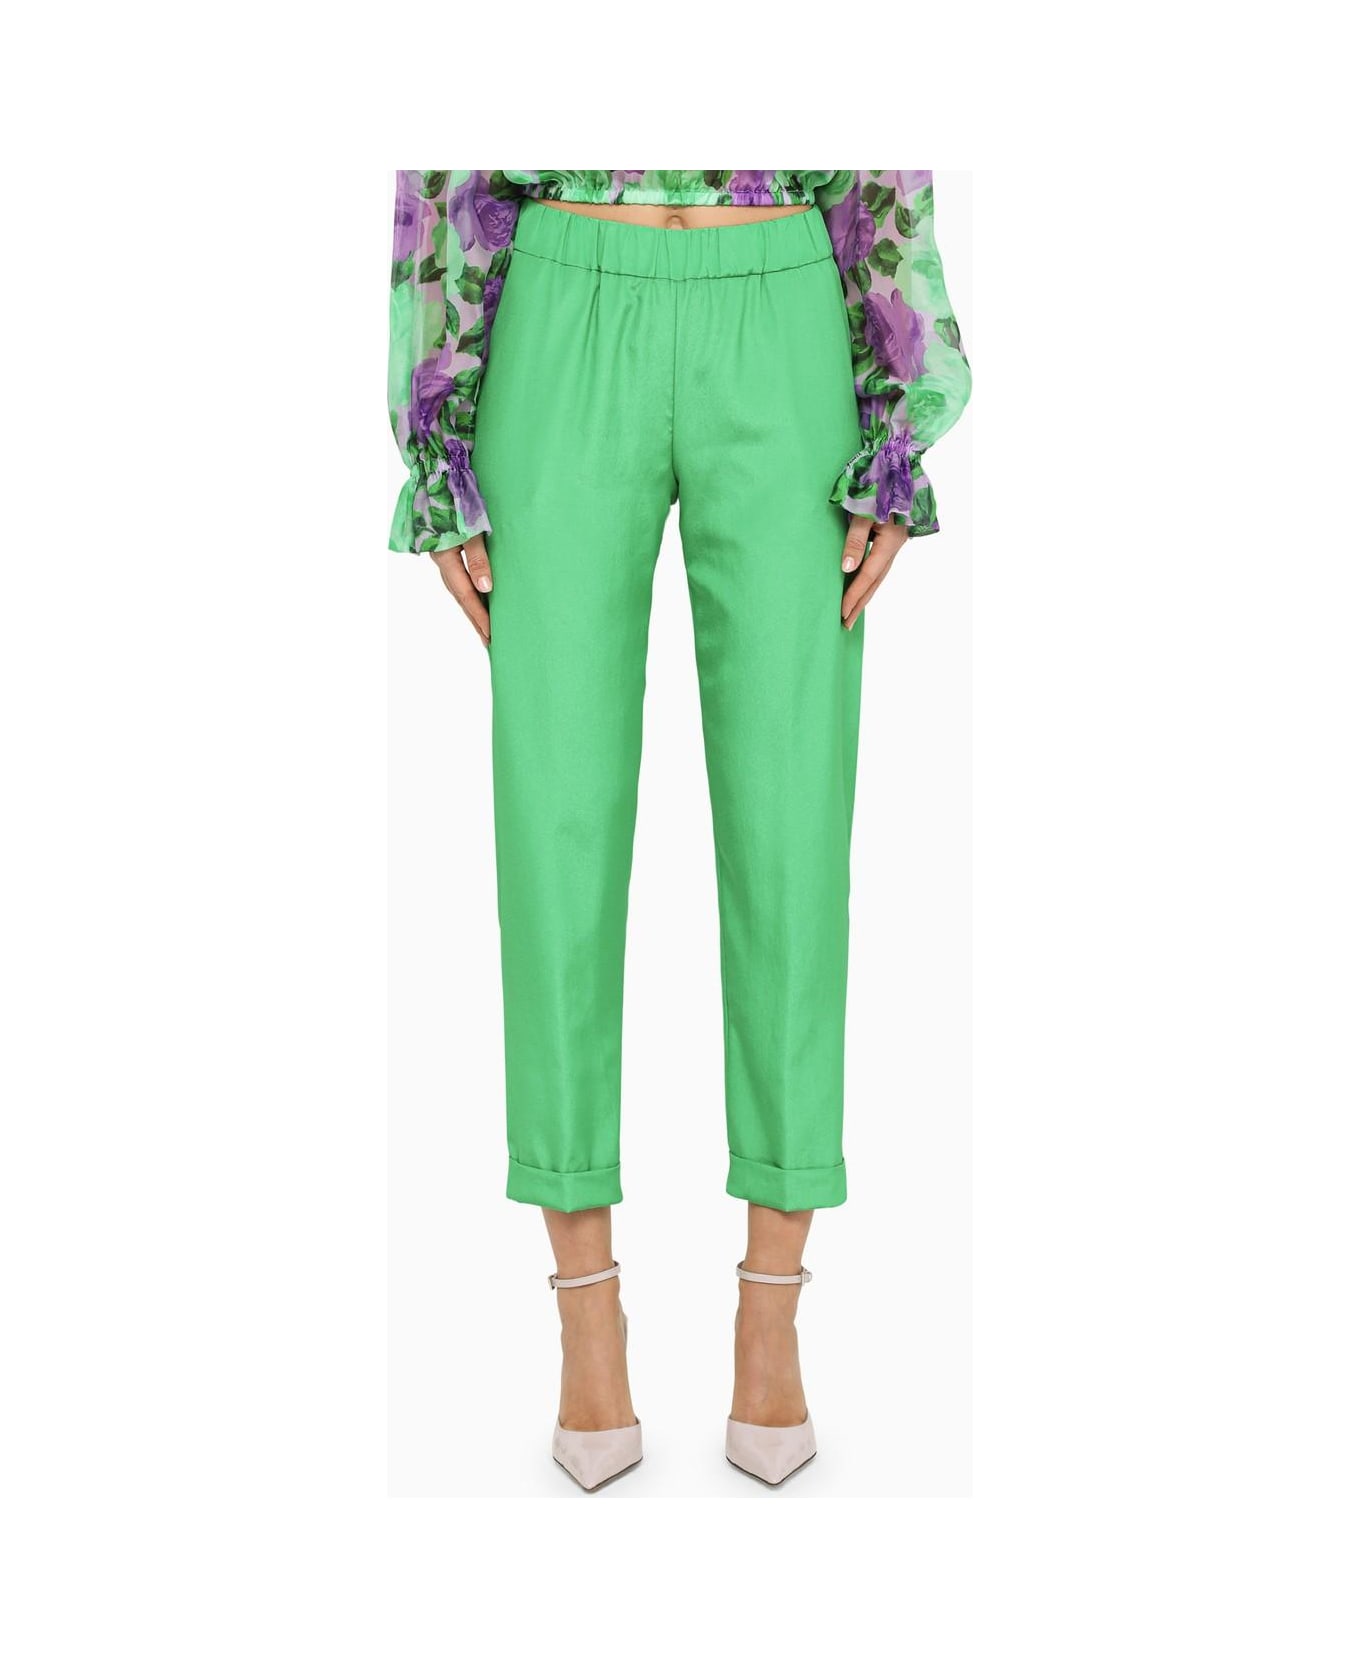 Parosh Green Satin Trousers With Elasticated Waistband - GREEN